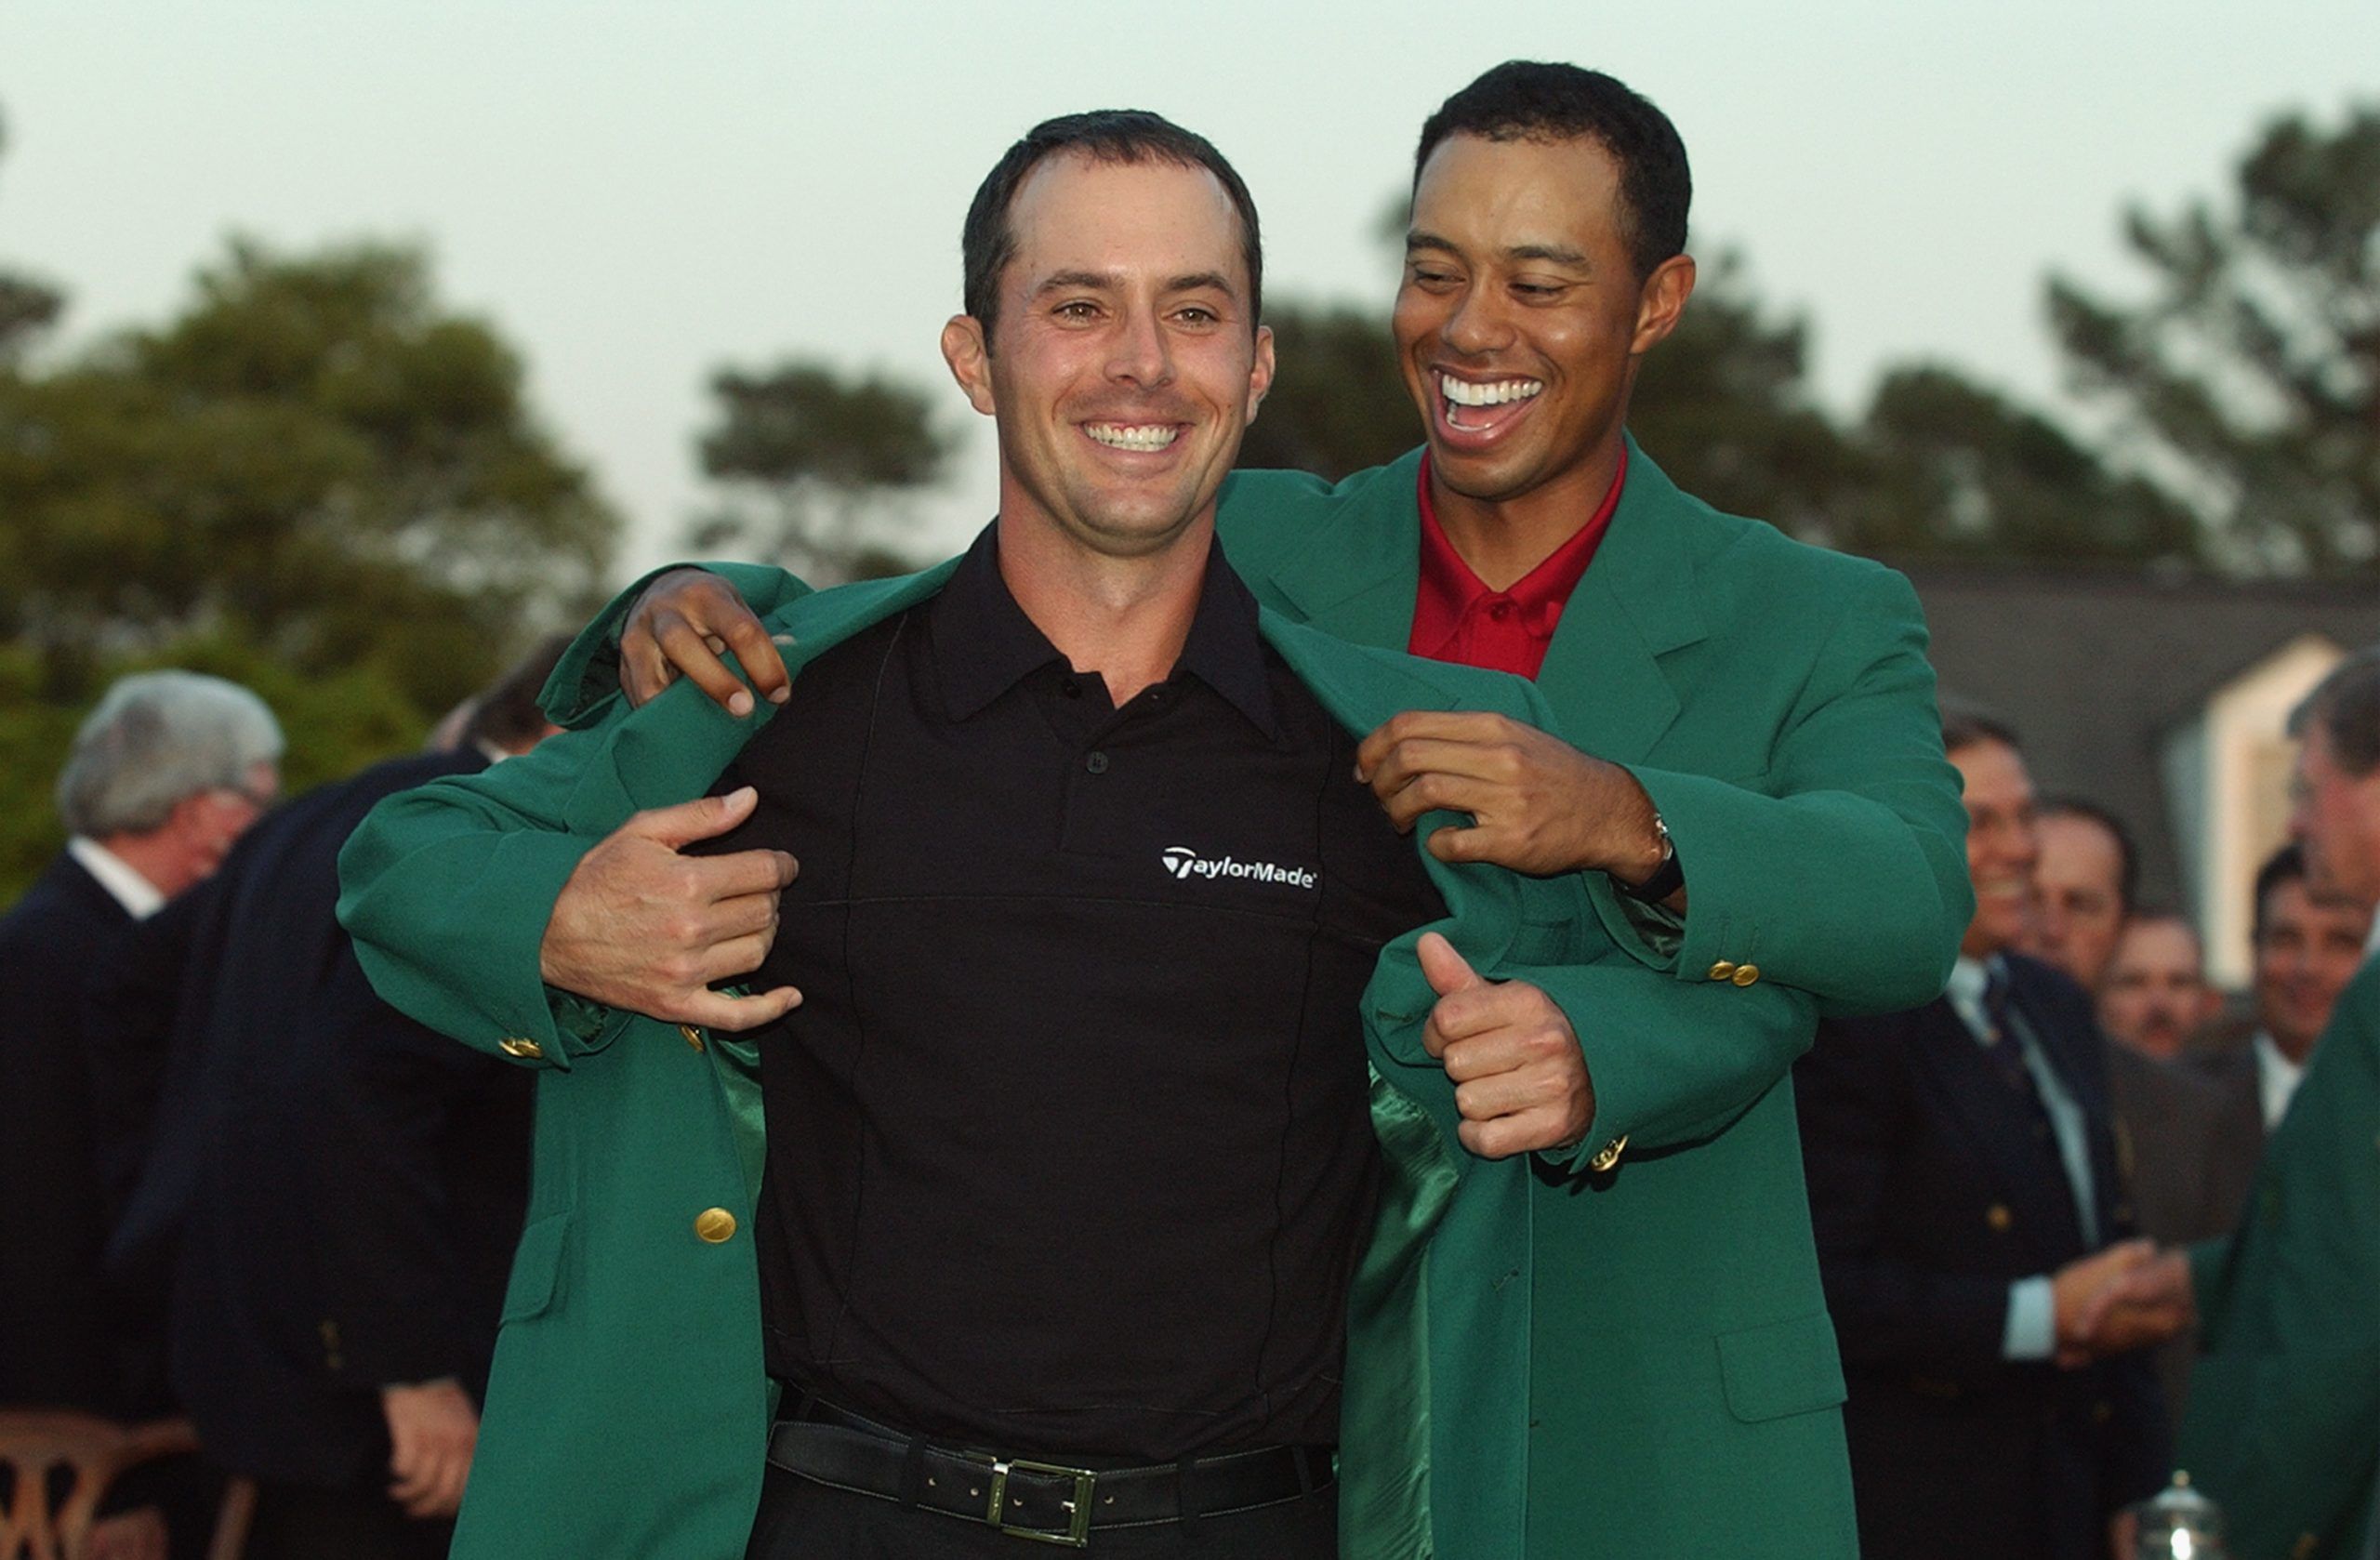 LFP ARCHIVES: When local golfer Mike Weir won the Masters | London Free ...